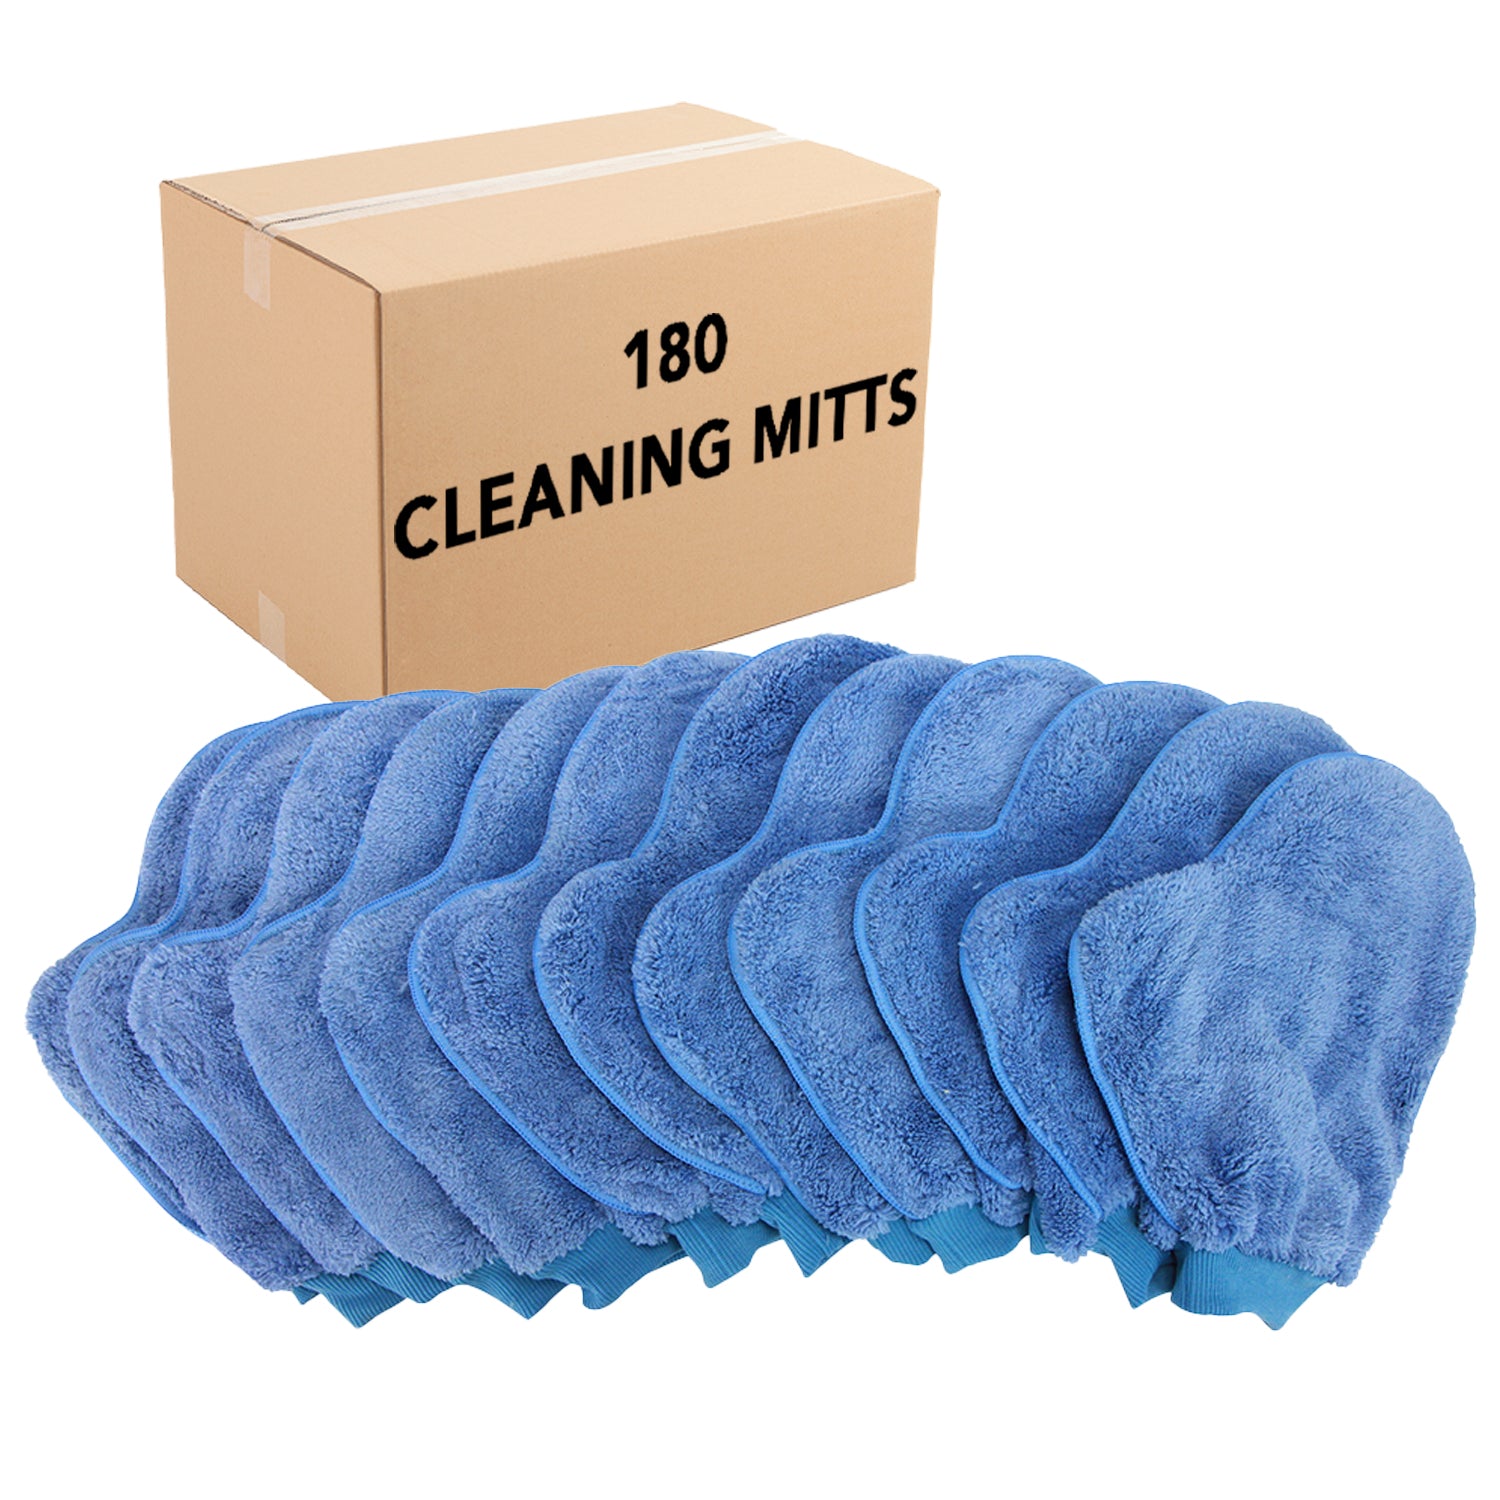 Monarch Linen 12 Pack of Blue Microfiber Dusting Mitts - Case of 180